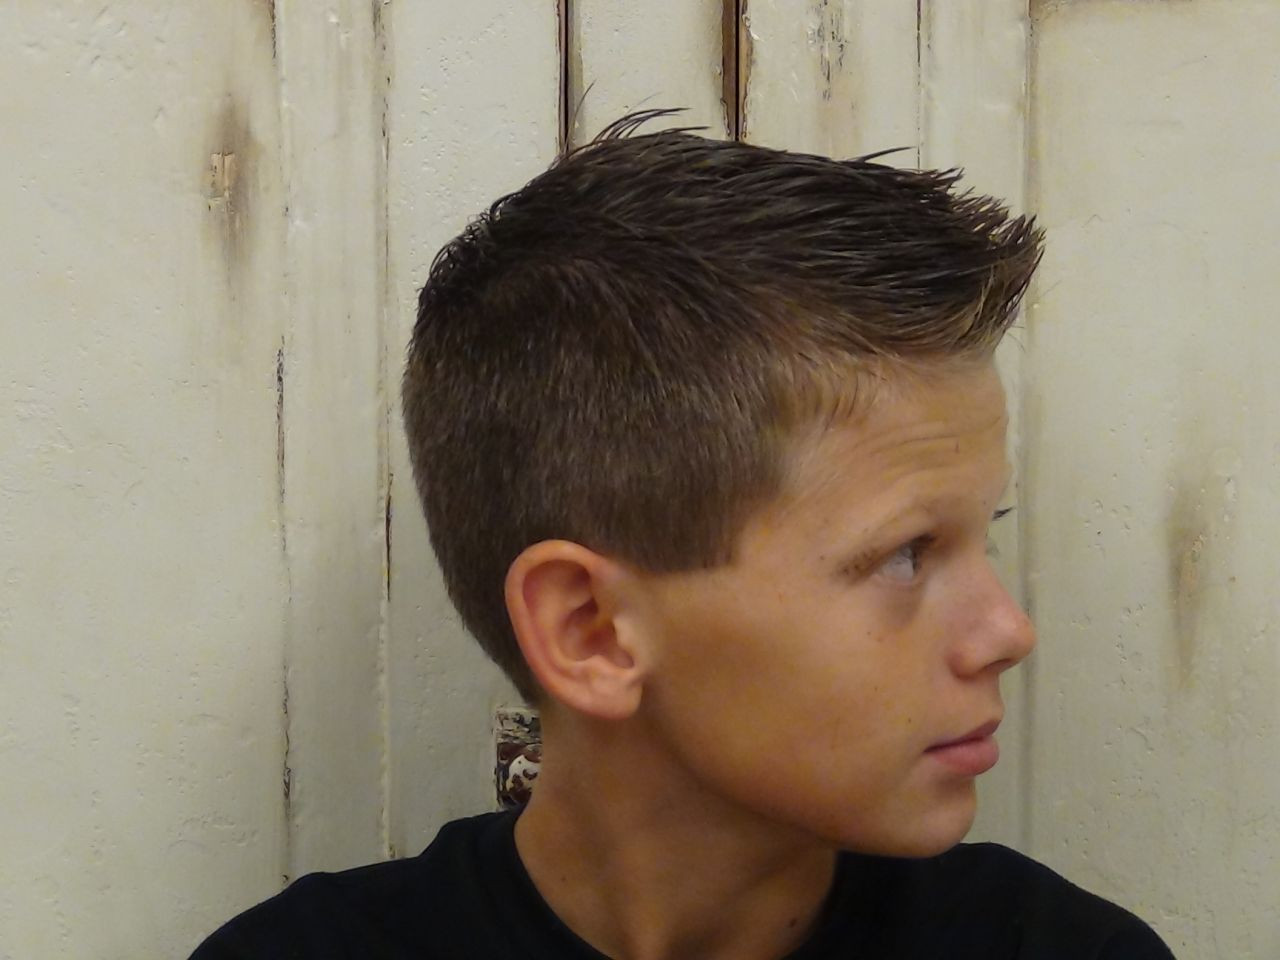 Cool 10 Year Old Boy Haircuts
 TOP 10 Hairstyles for 10 year old boys 2017